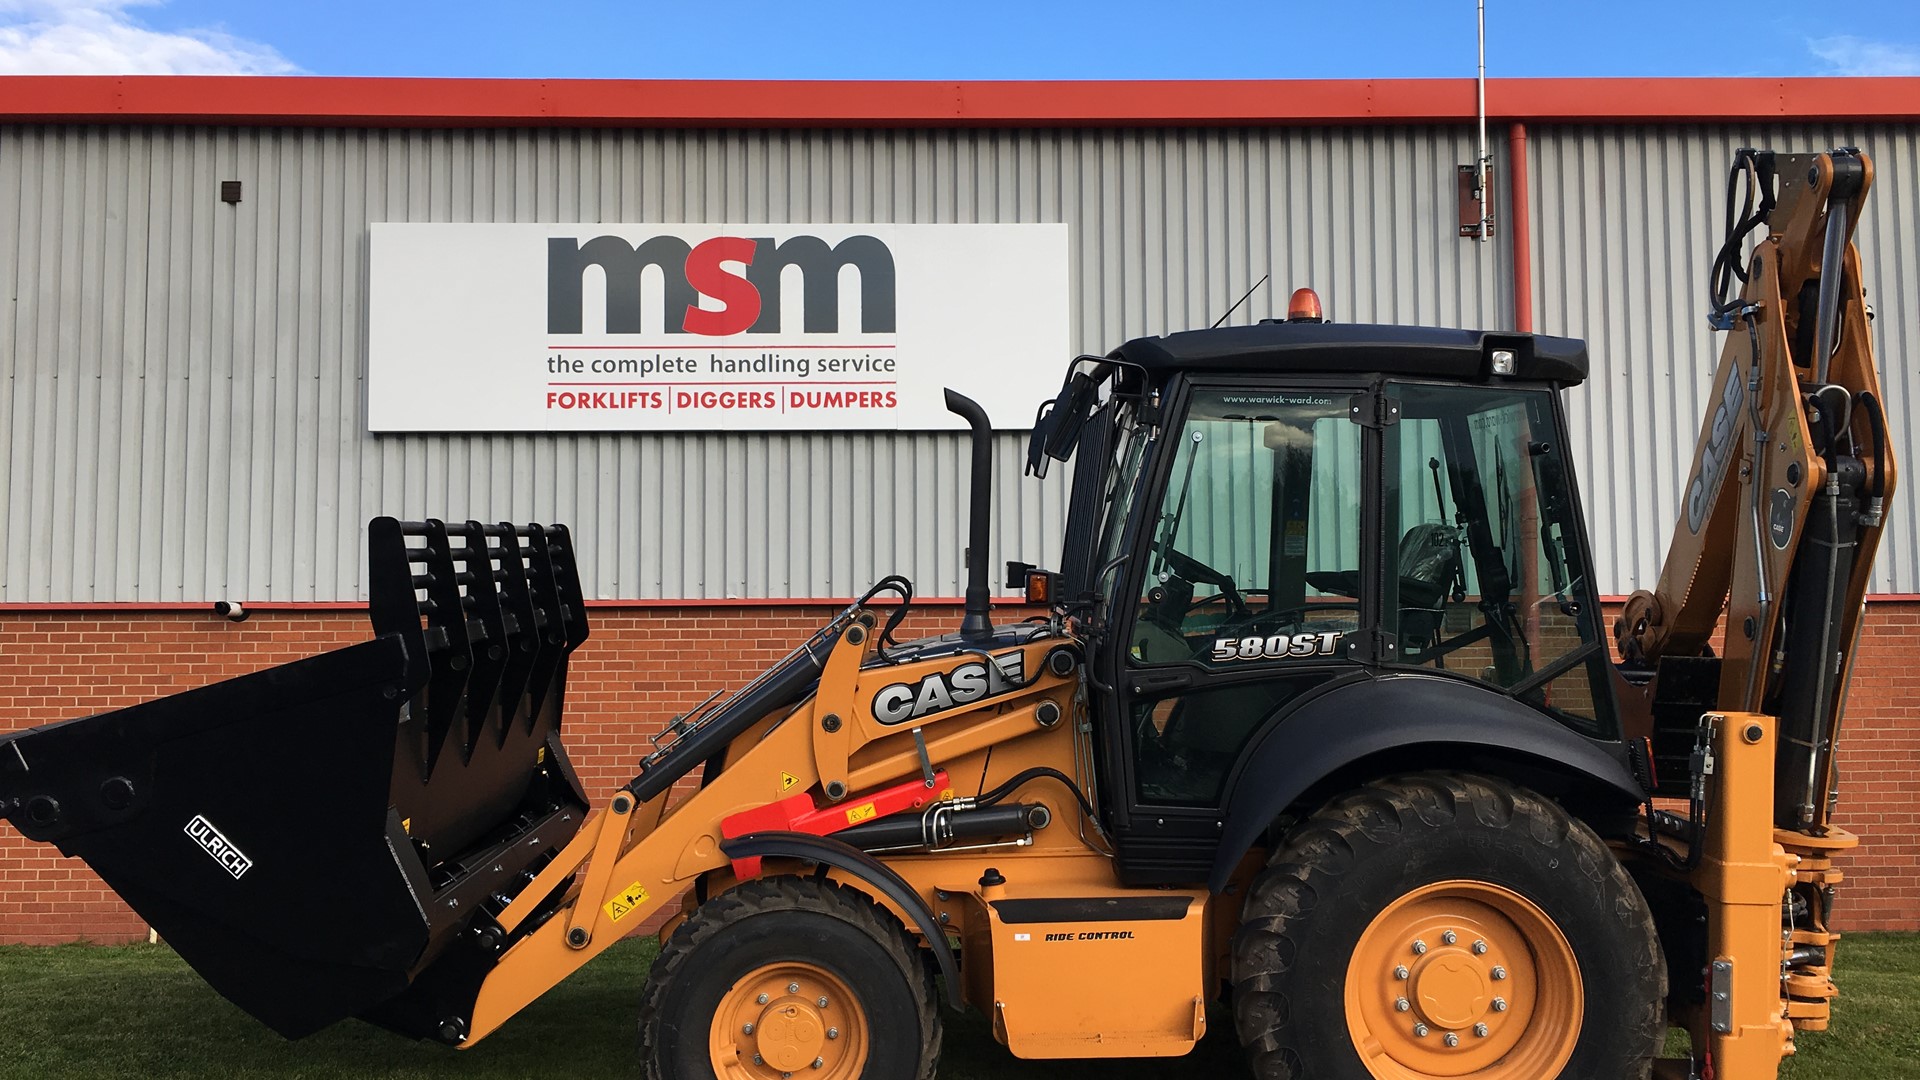 CASE Construction Equipment, together with their dealer Warwick Ward, has entered into a new partnership with MSM DRH